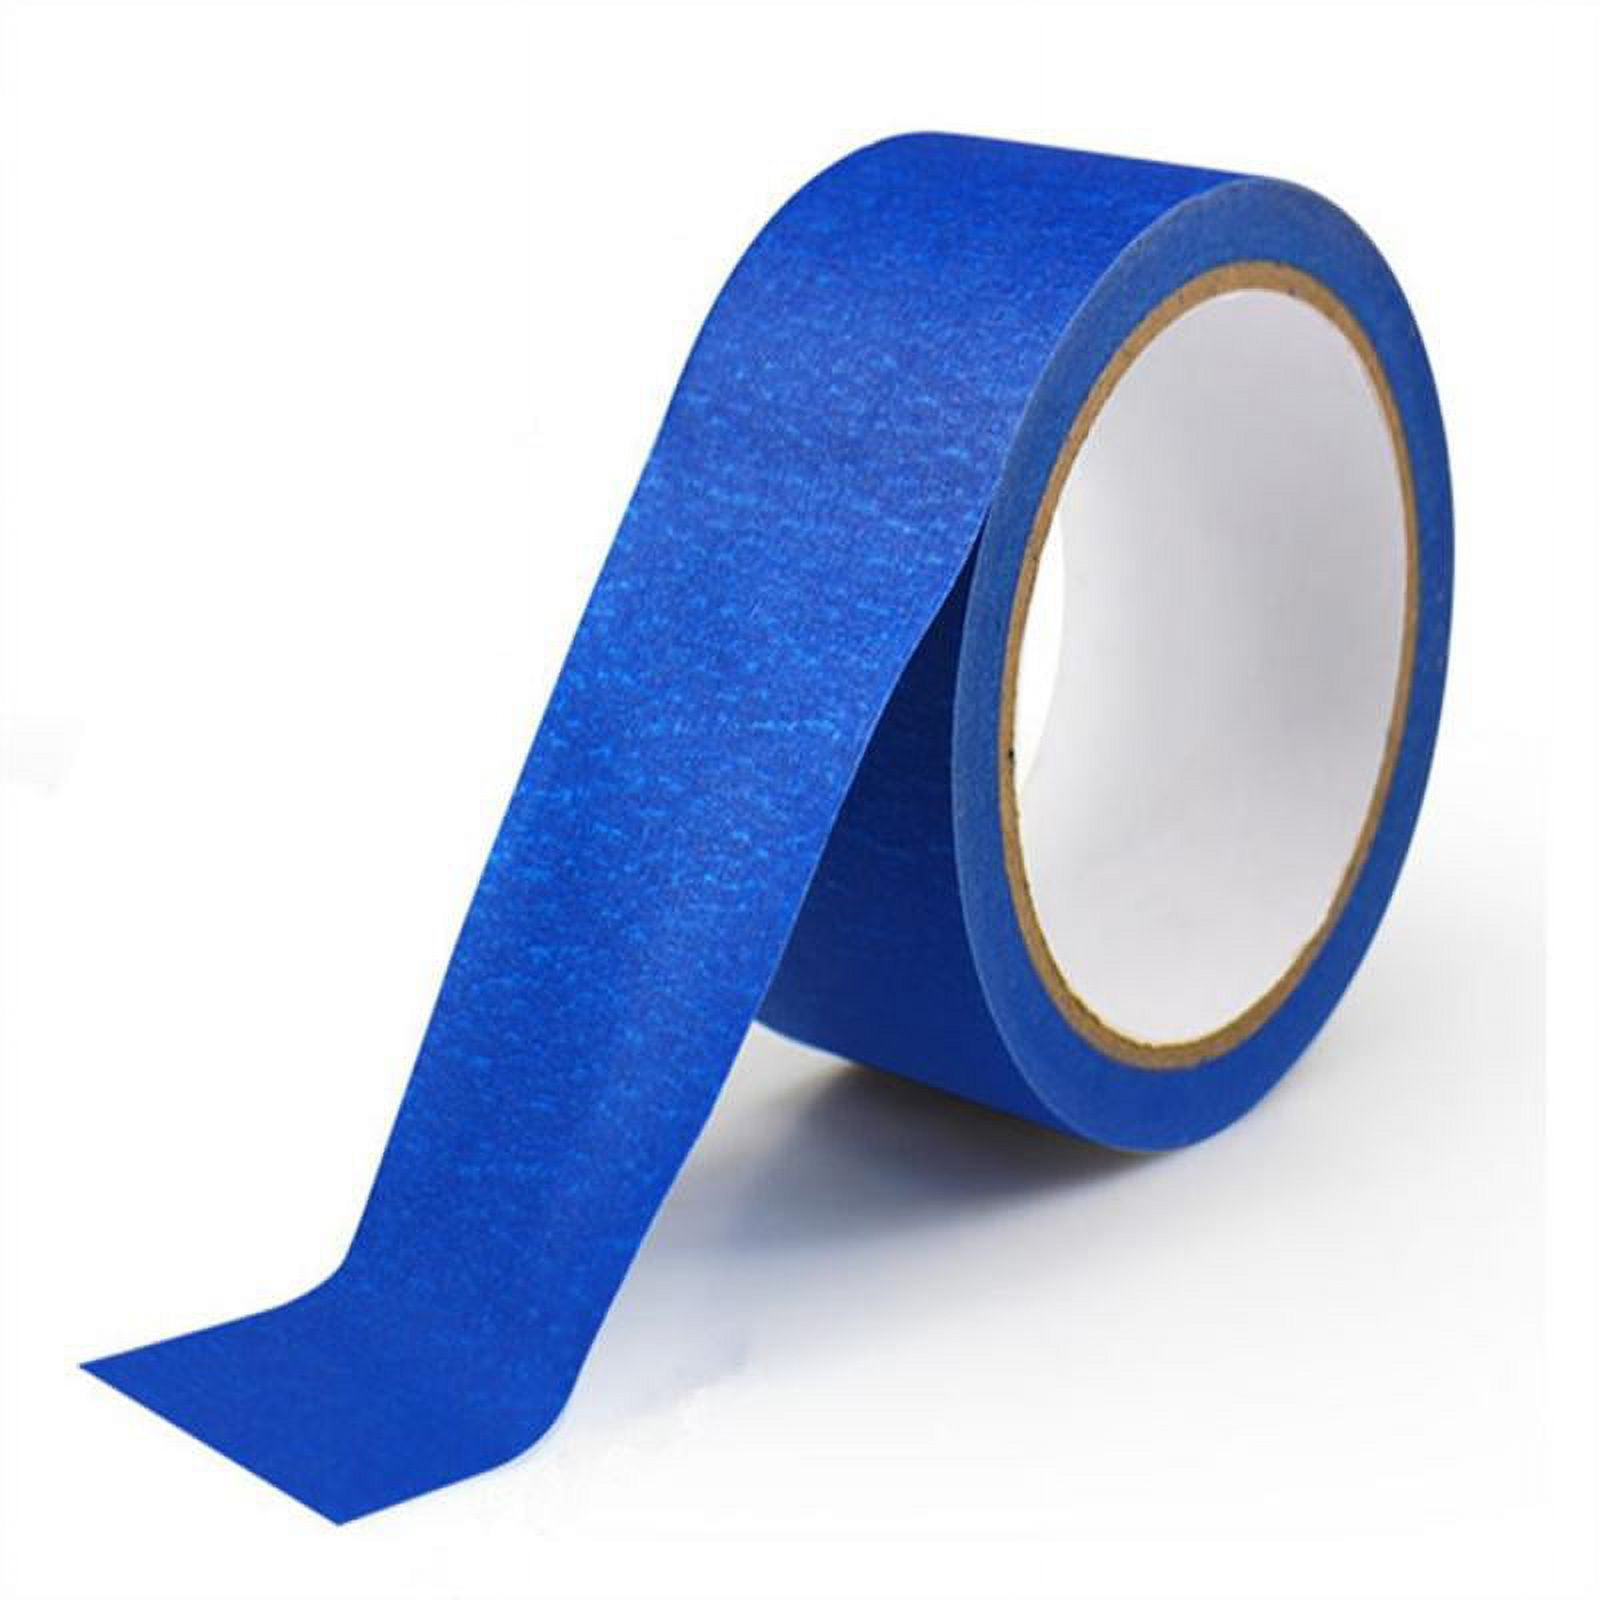 Blue Painters Tape 1 Pk. Easy-Tear, Pro-Grade Removable Masking Tape Great  for Home, Office,Clean, Drip-Free Painting with Wide Crepe Paper Rolls